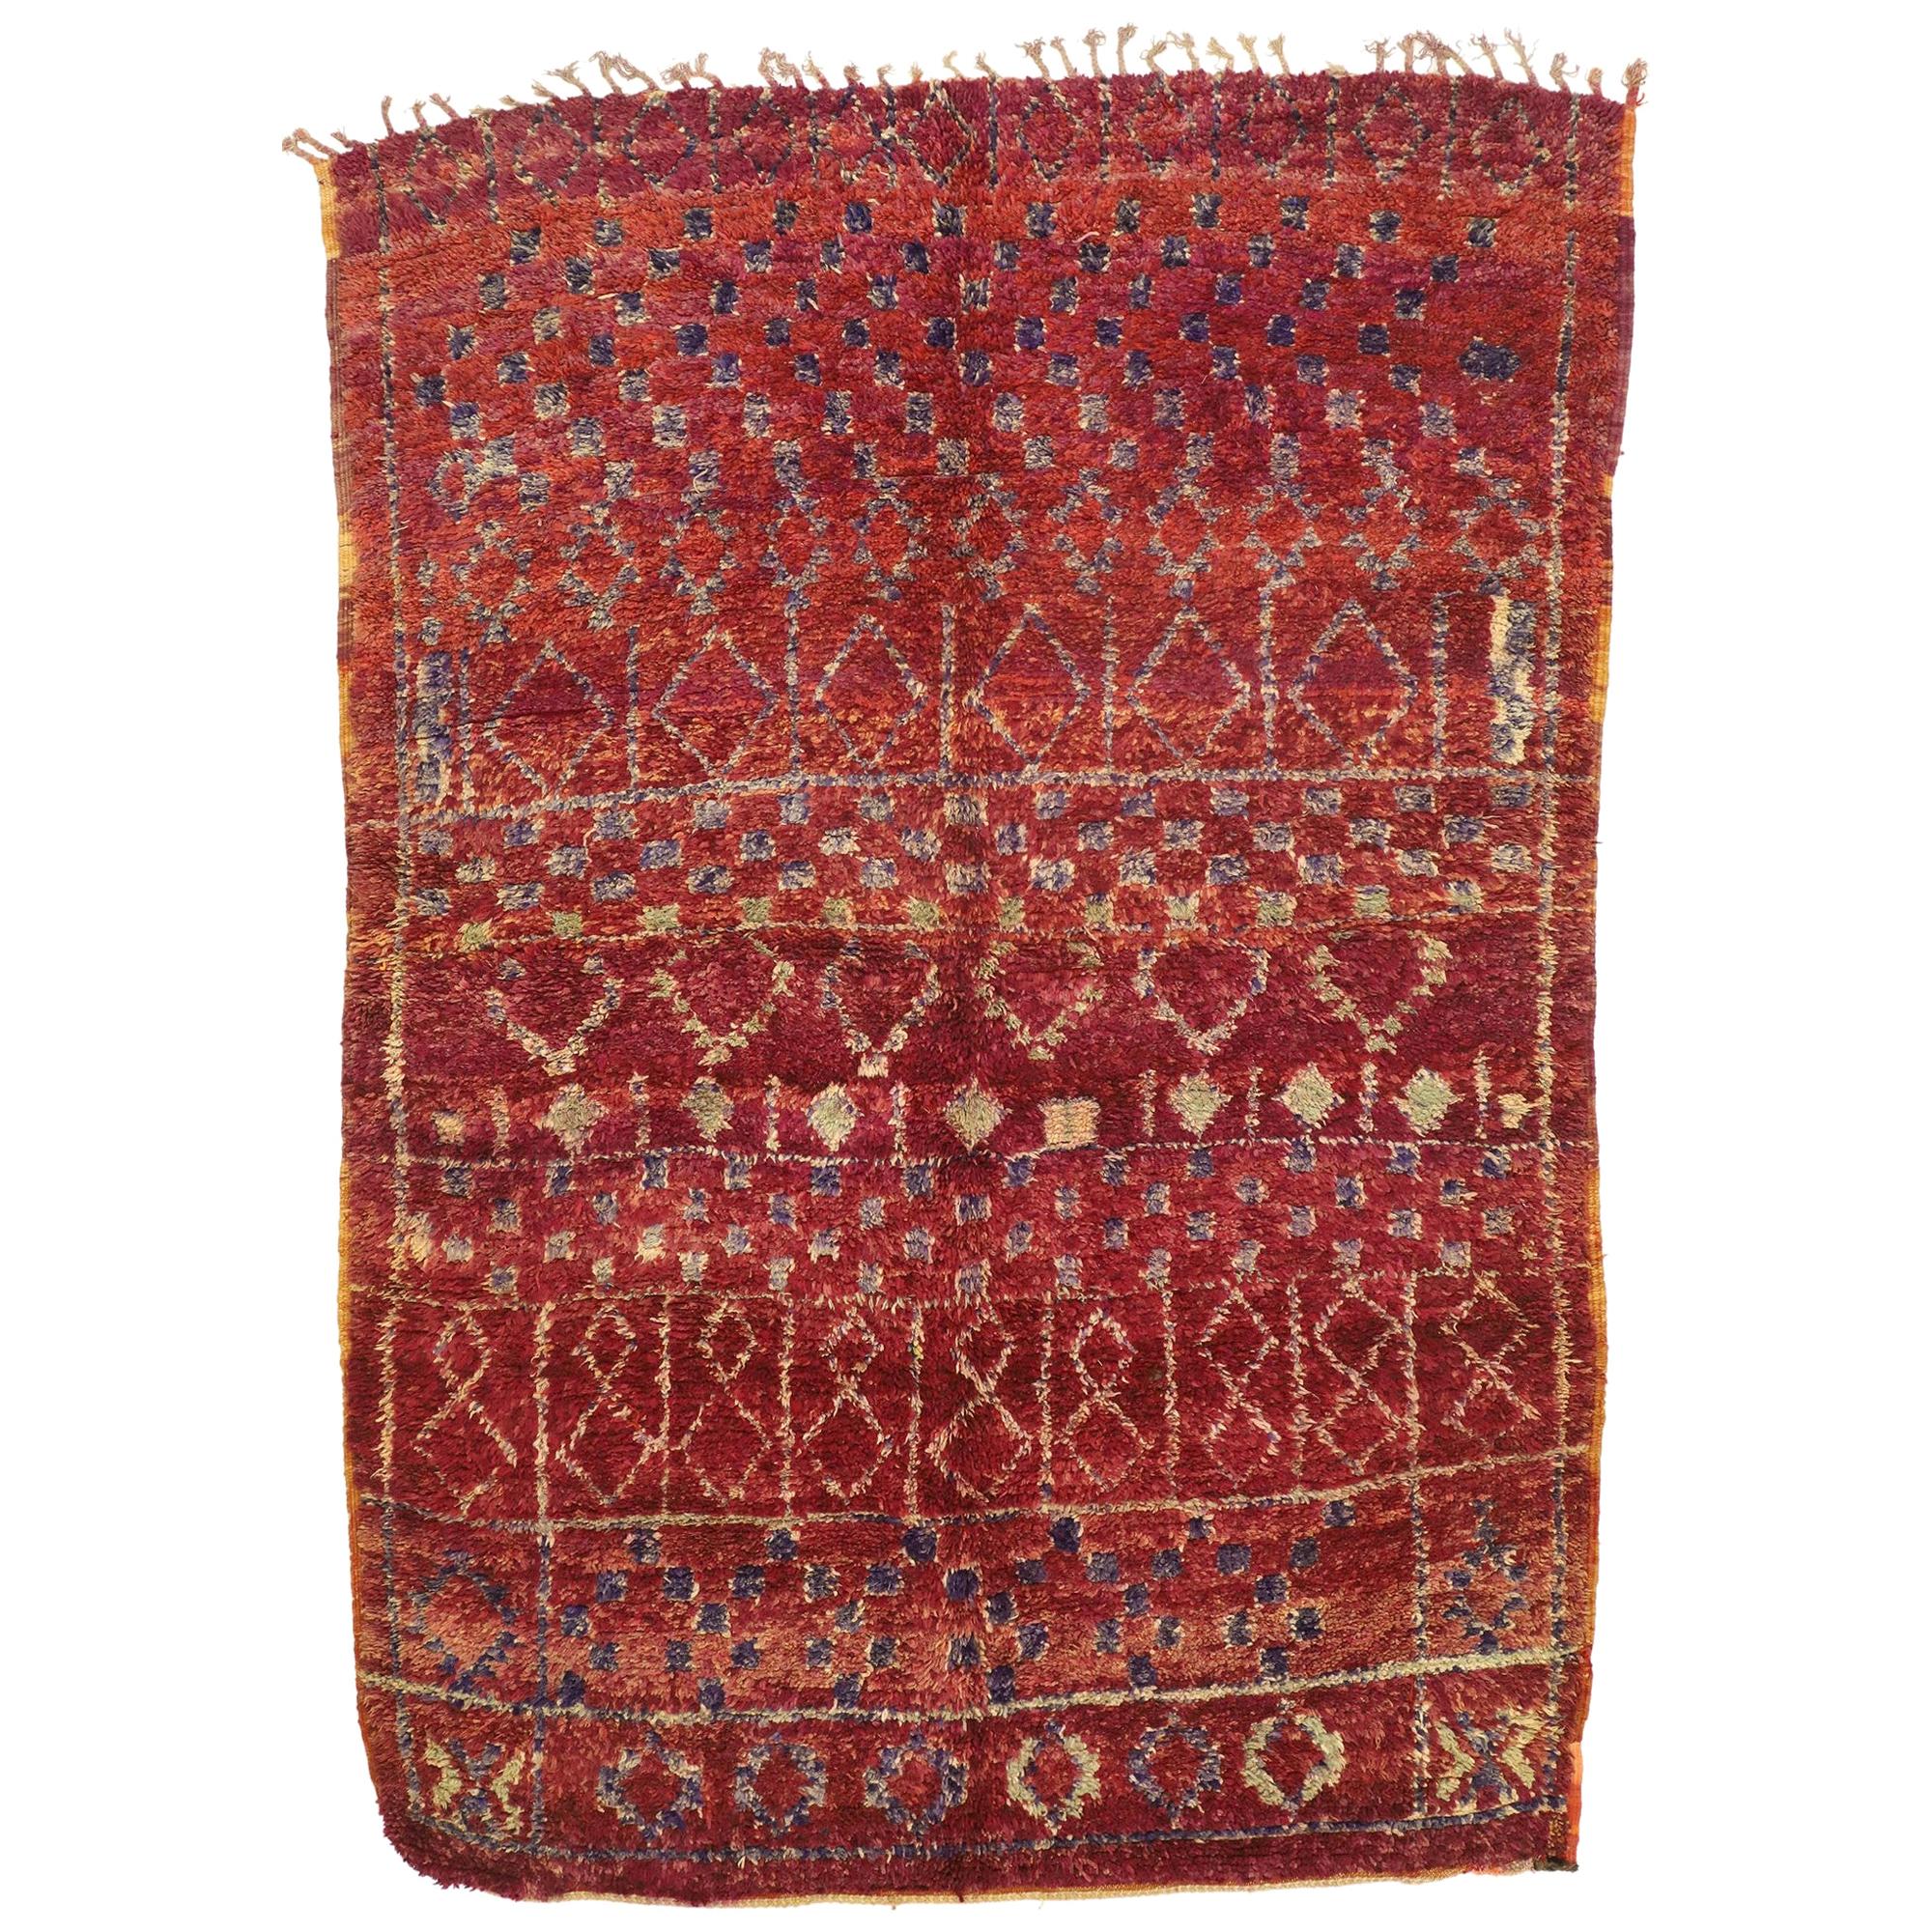 Vintage Berber Moroccan Rug with Postmodern Boho Chic and Memphis Style